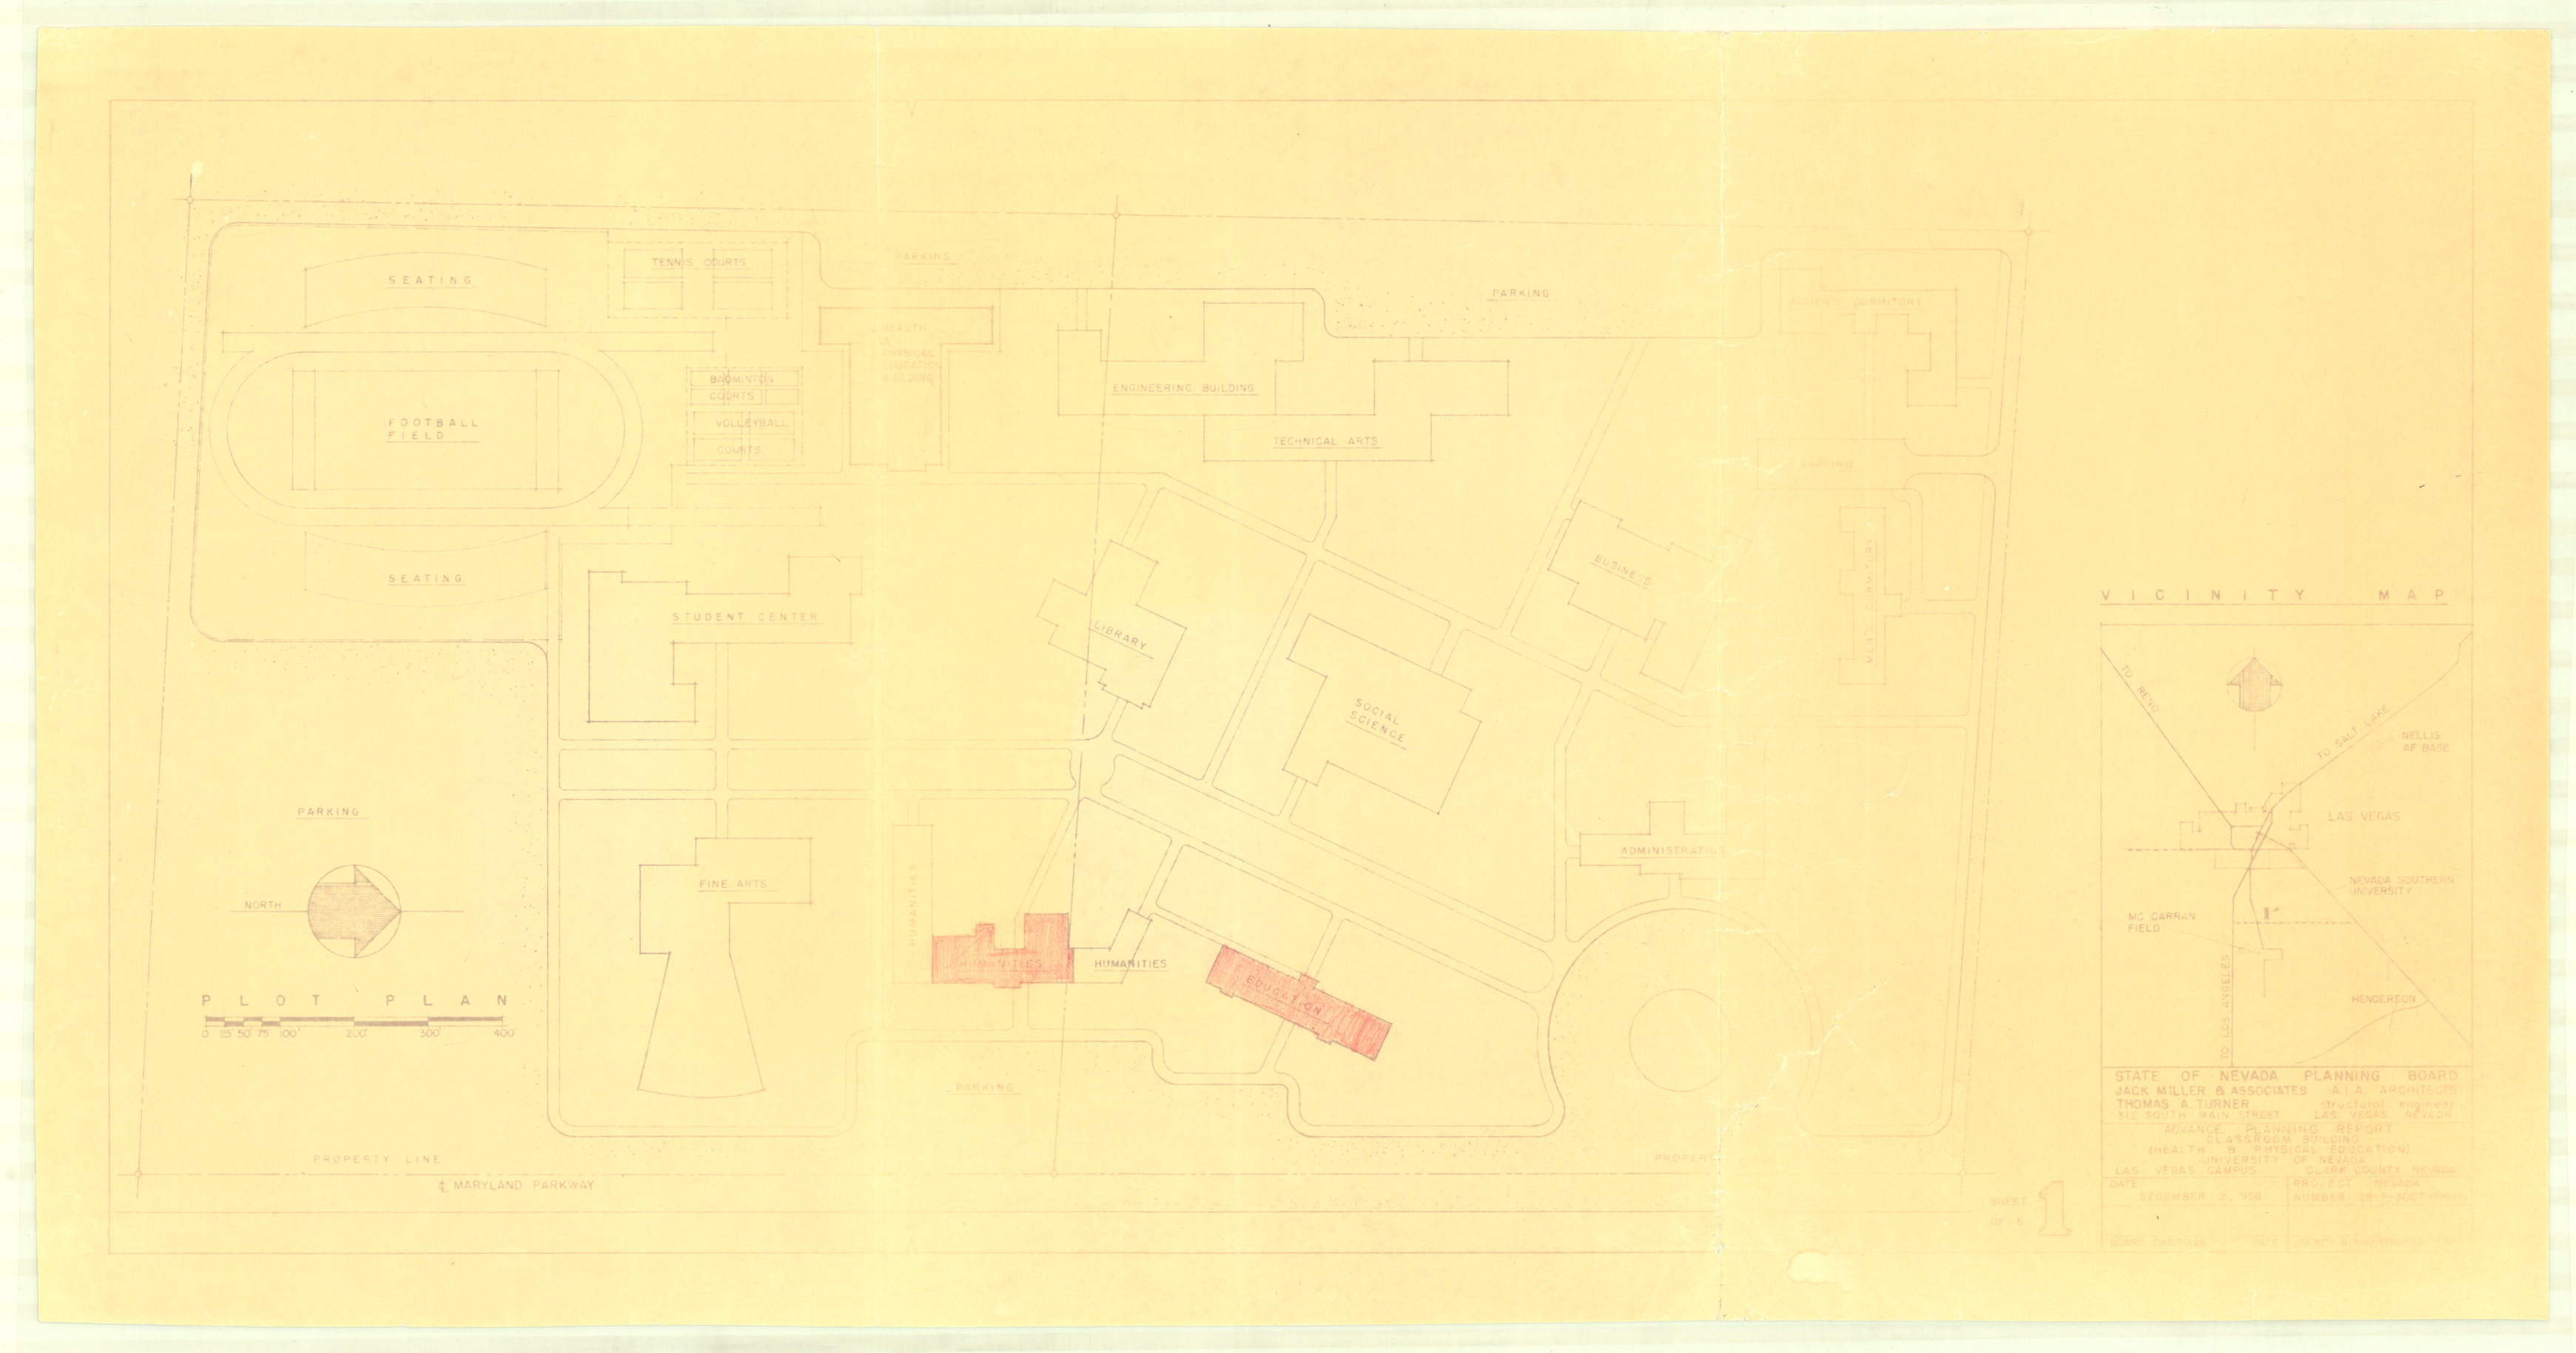 Nevada Southern University master plan: architectural drawings, image 002